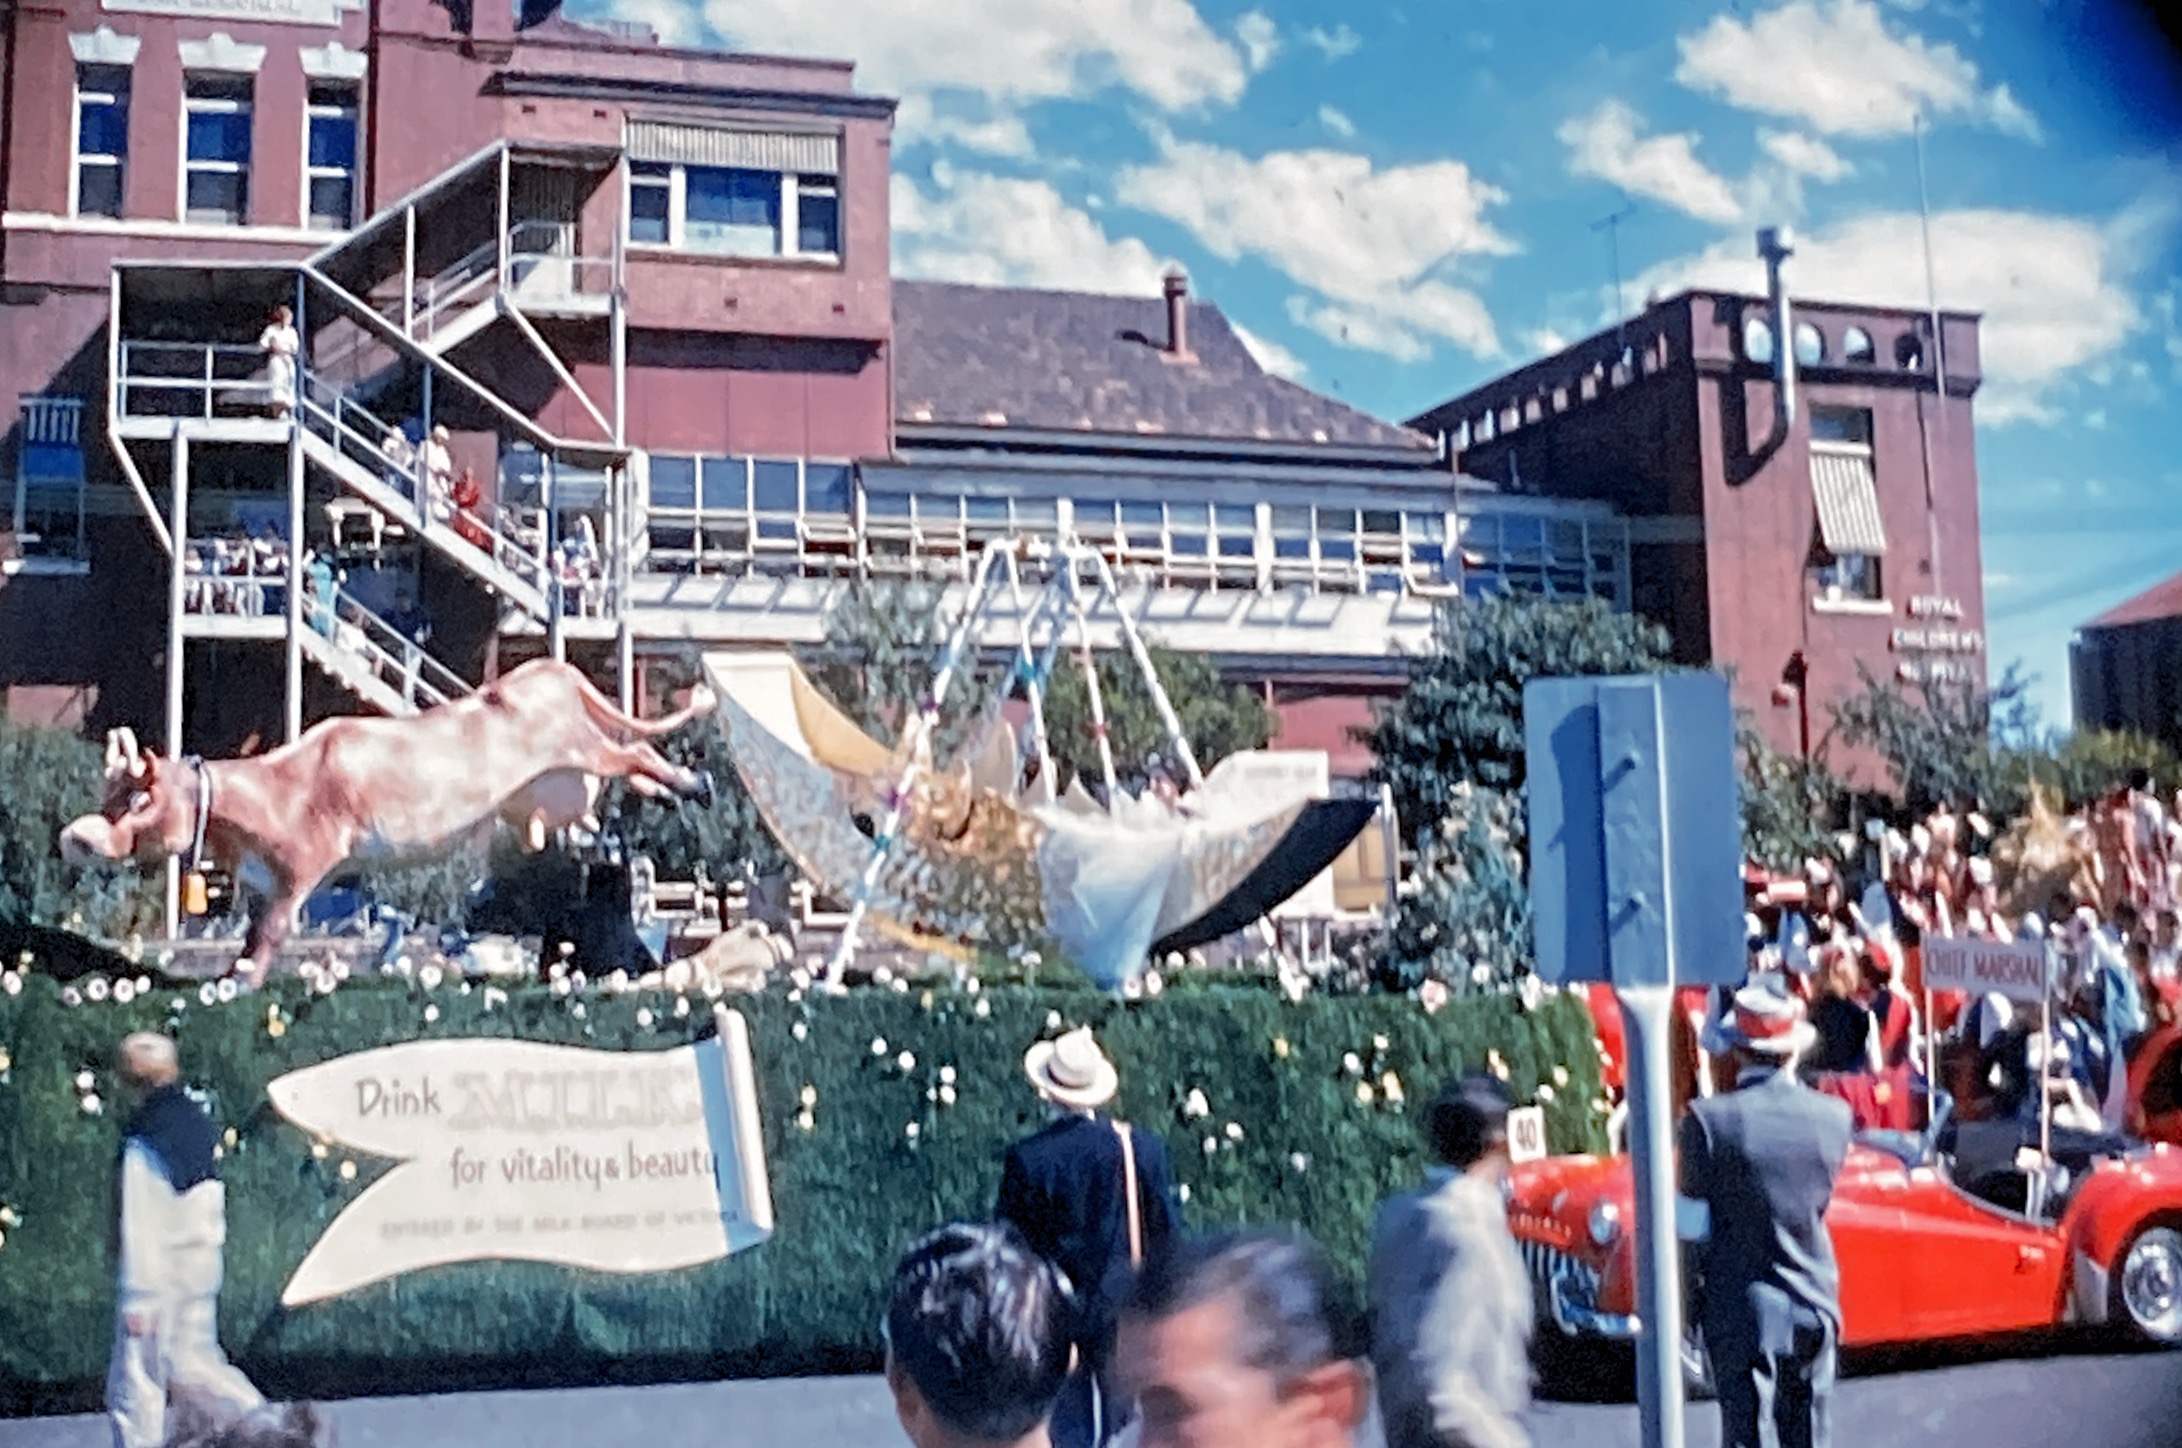 ‘Drink milk for health and vitality!’Moomba parade 1961, with Royal Children’s Hospital in the background. Photographed by my father, Richard Scott.